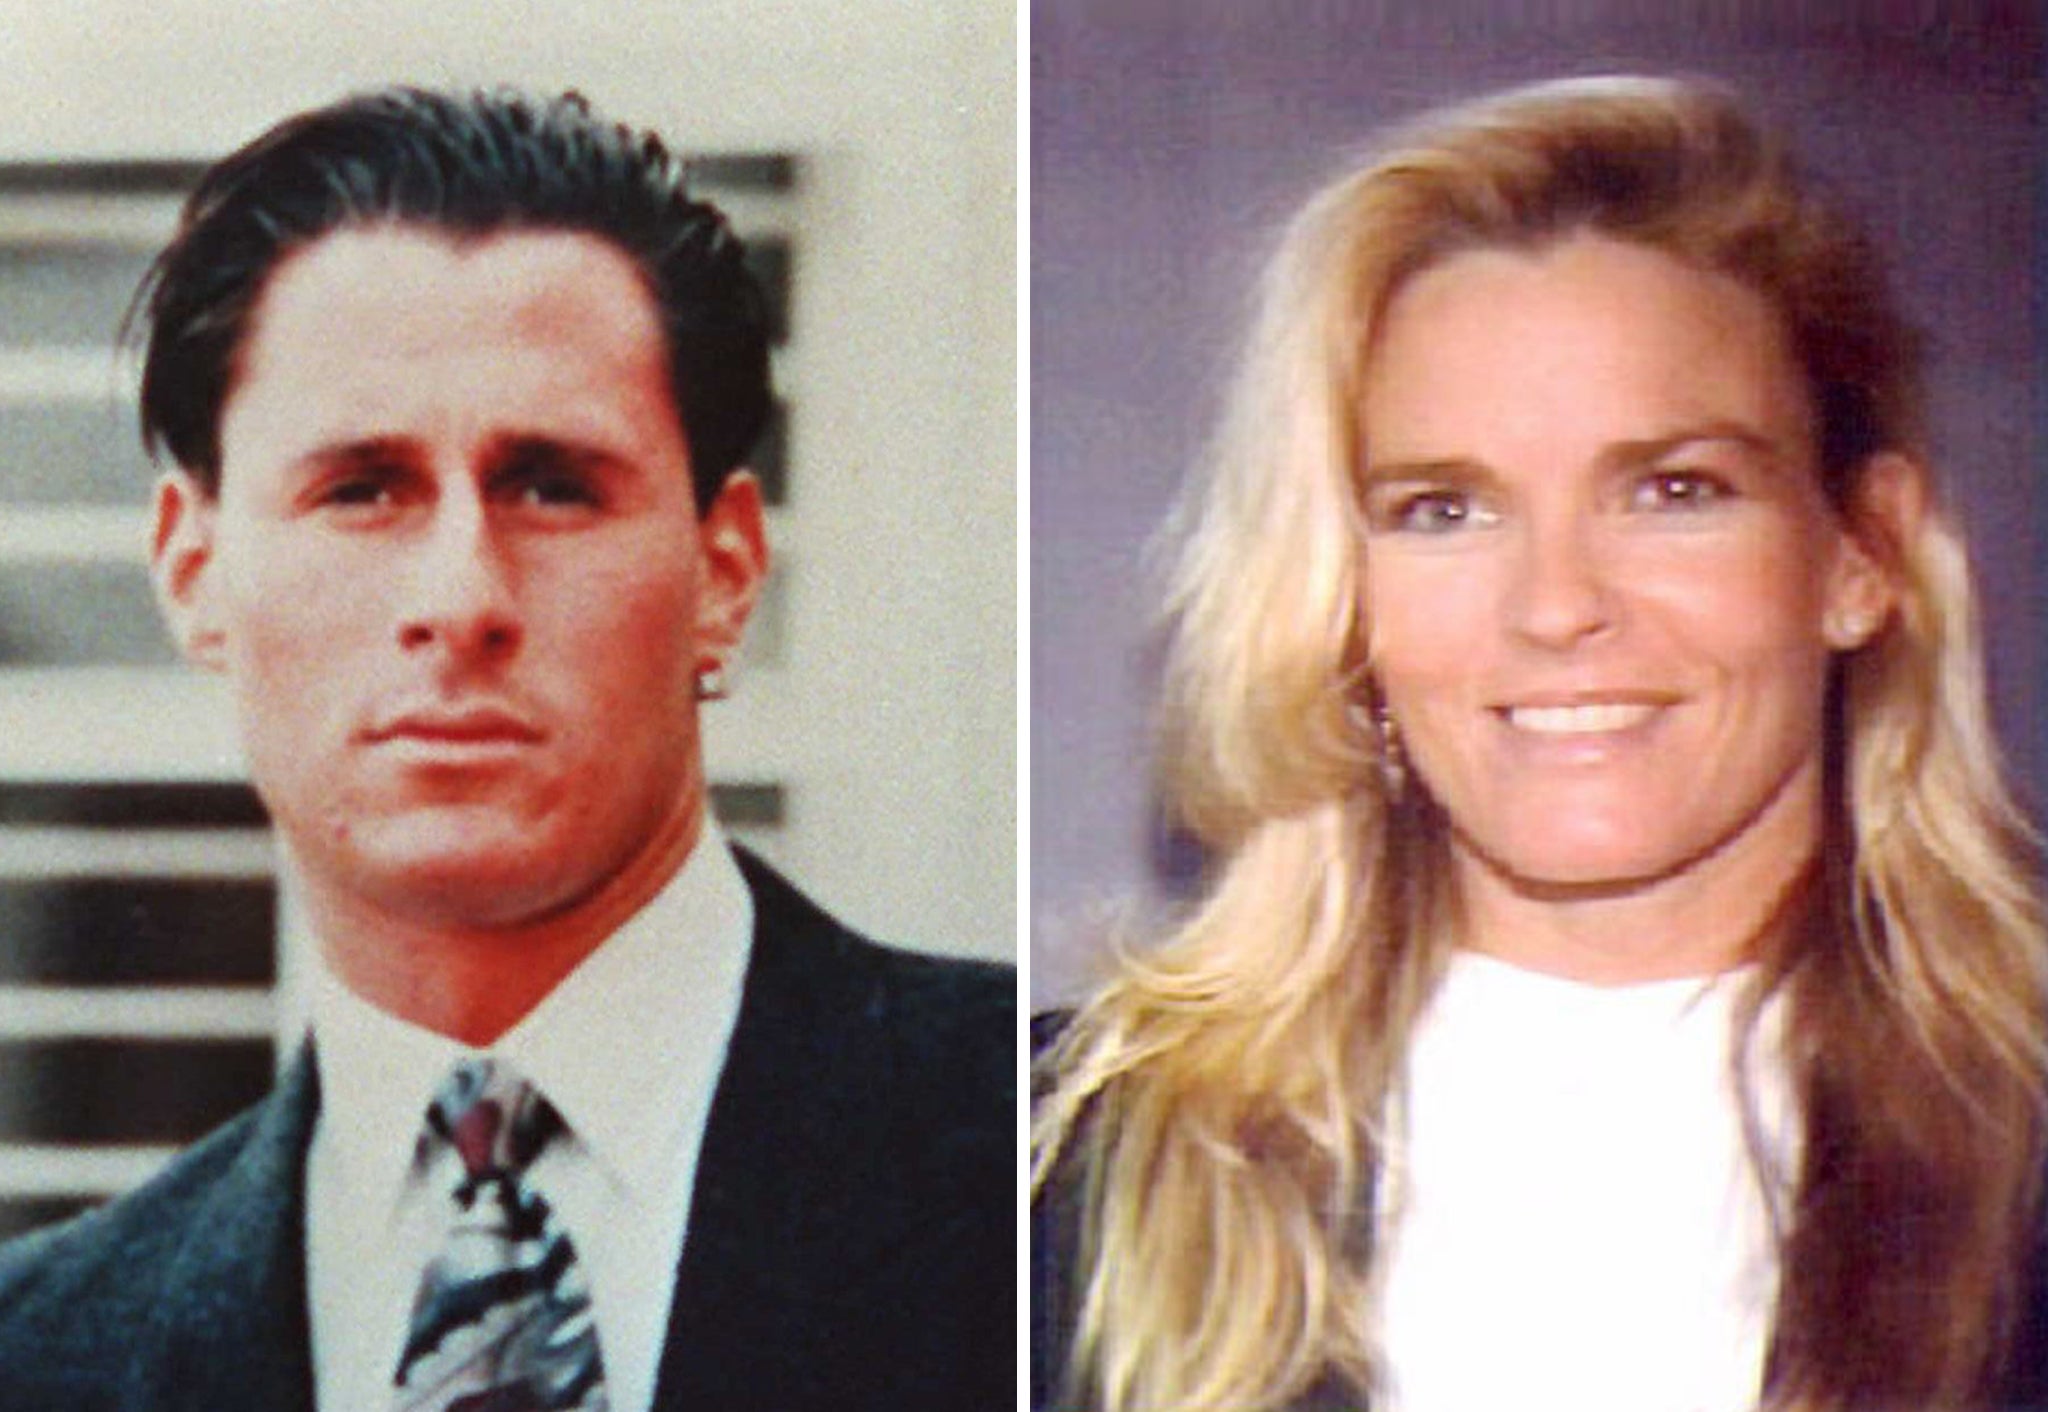 Ron Goldman and Nicole Brown Simpson were murdered in June 1994